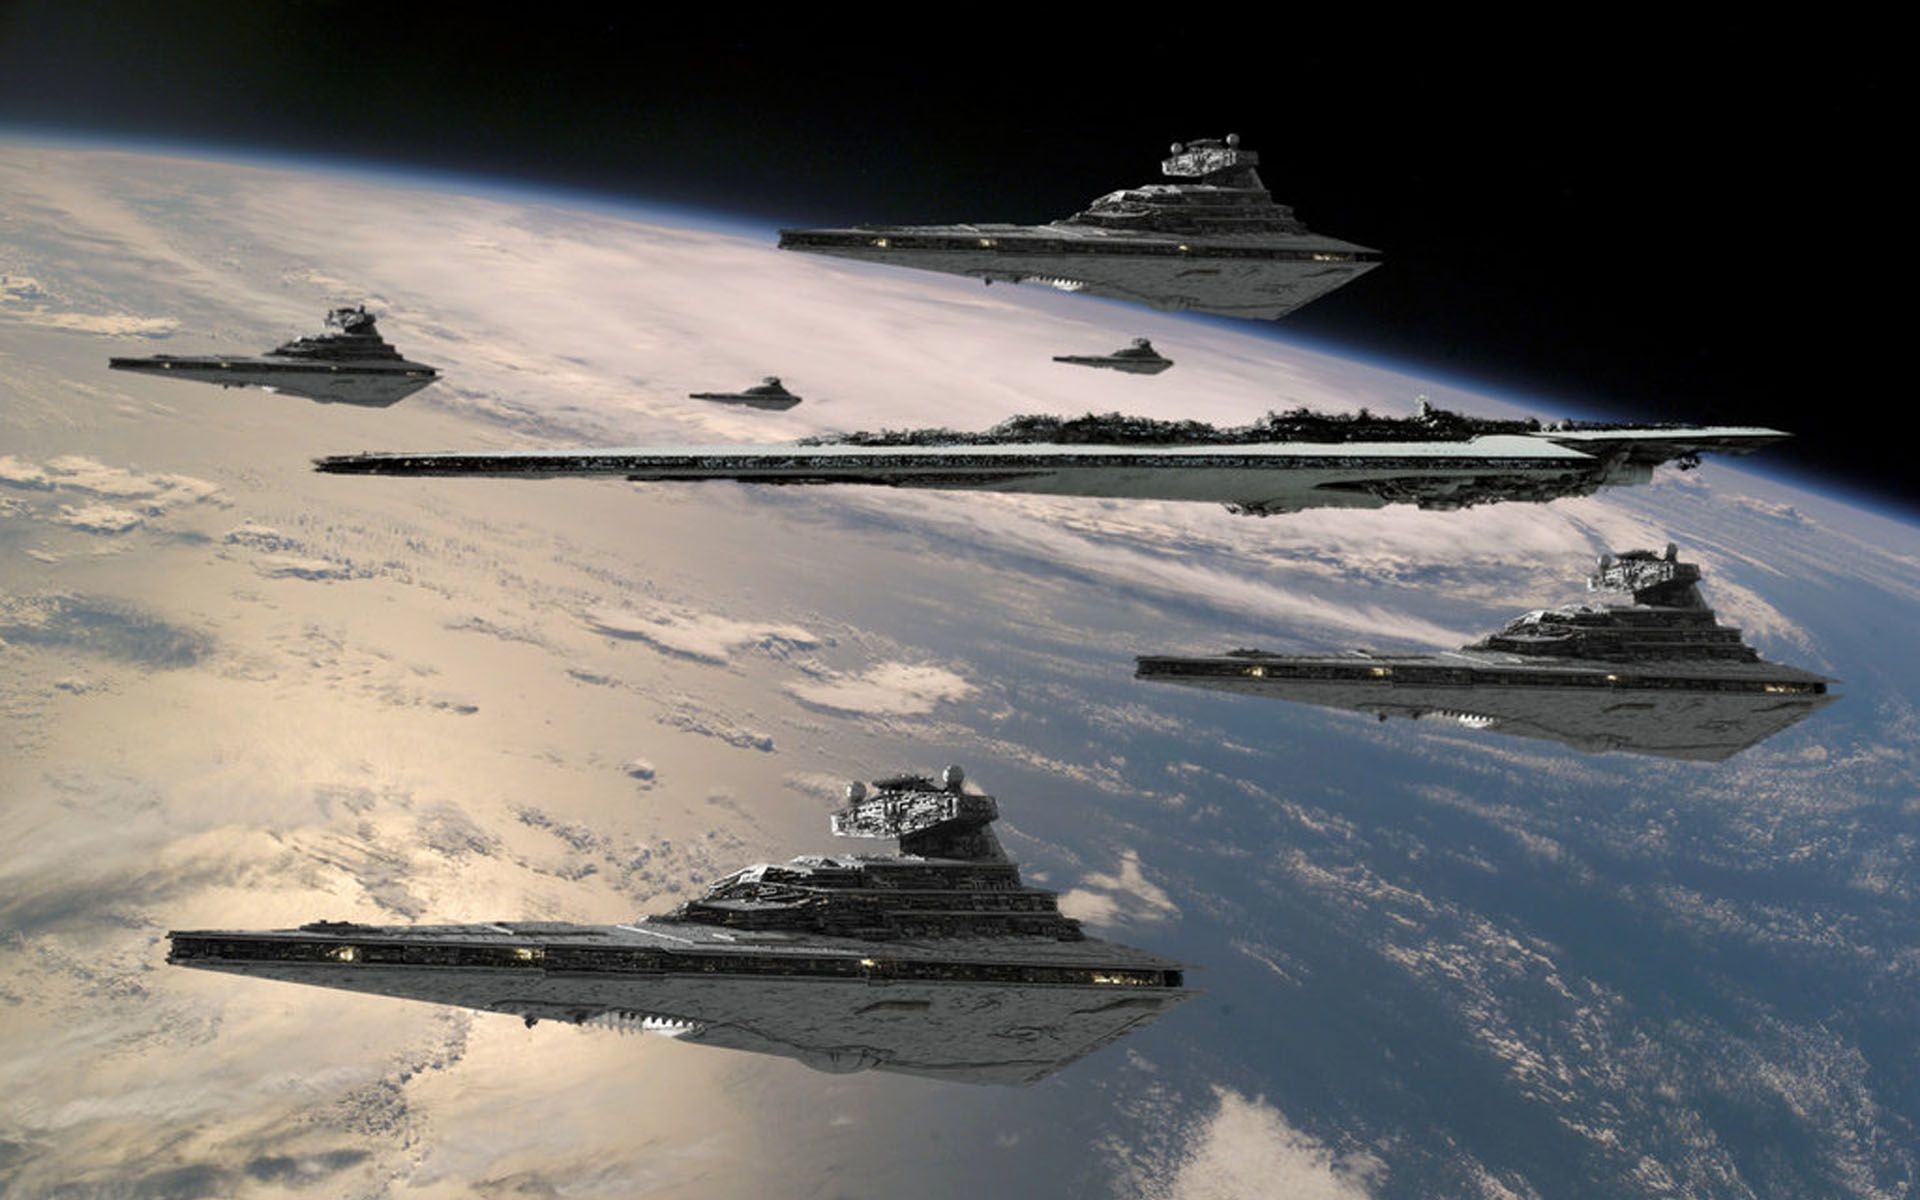 Imperial Star Destroyer Fleet with The Executor Super Star Destroyer over planet